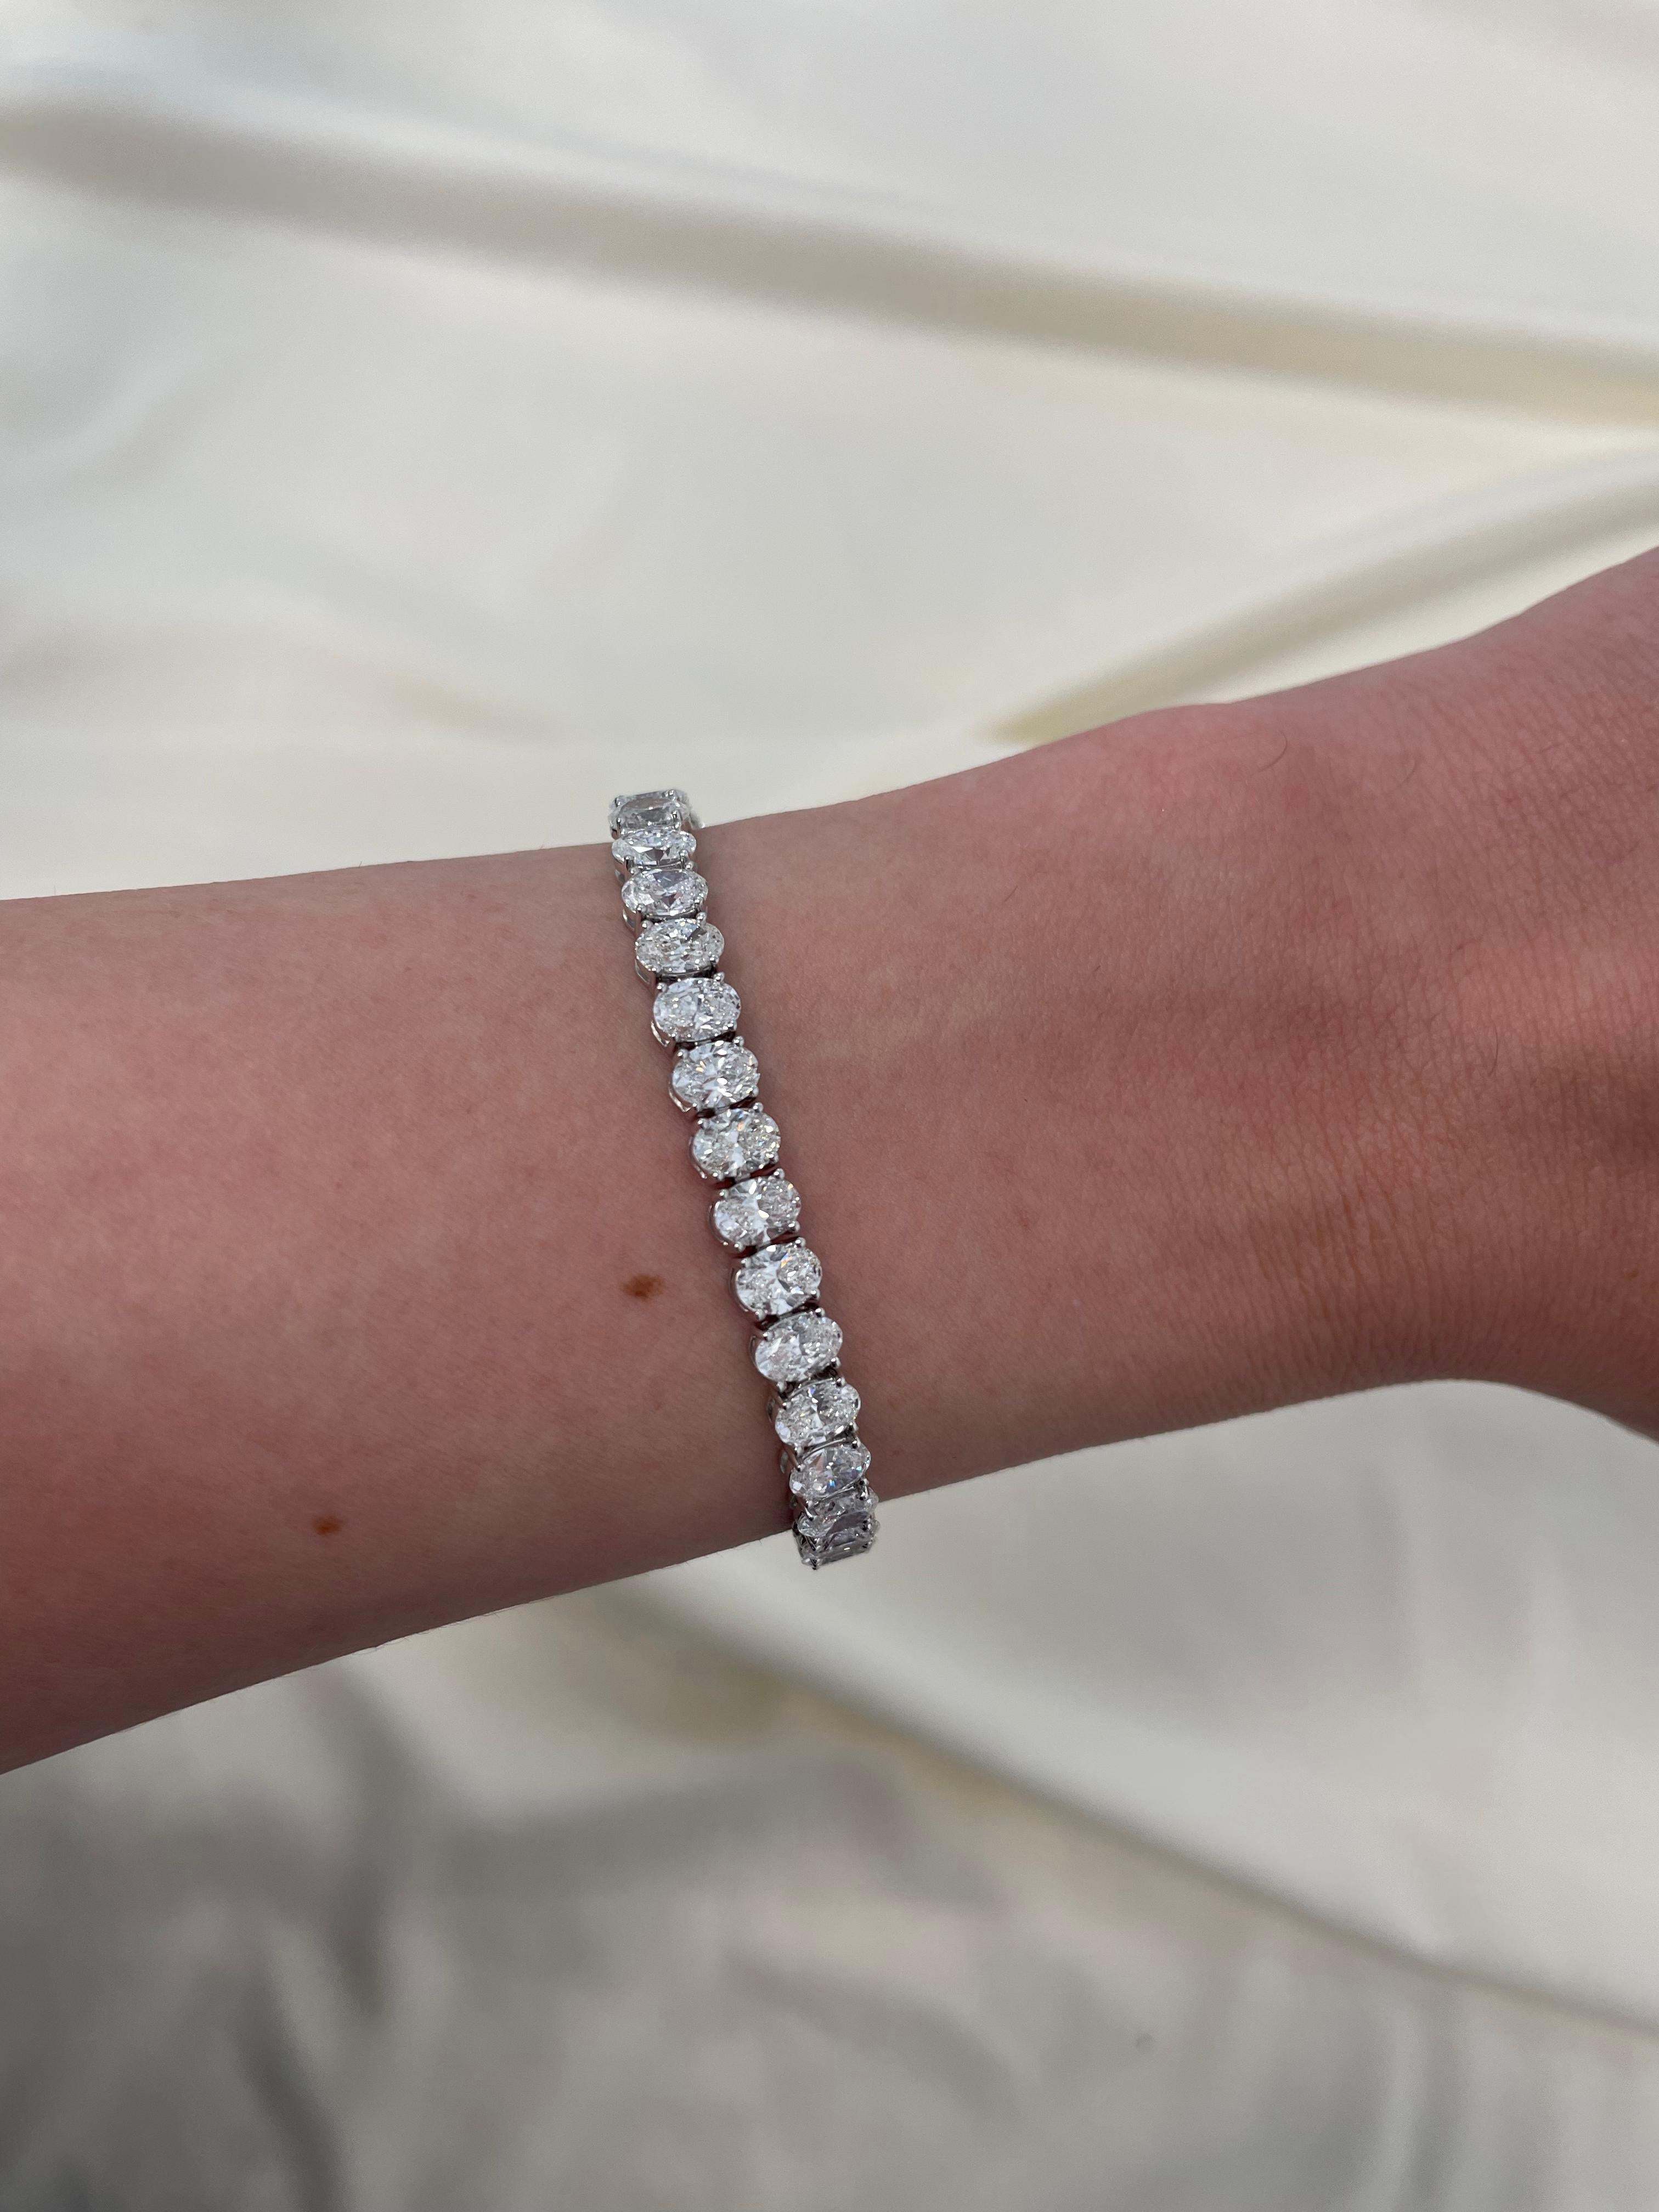 Stunning modern straight oval cut diamond tennis bracelet. High jewelry by Alexander Beverly Hills.
45 oval cut diamonds, 13.37 carats. Approximately F/G color and VS2/SI1 clarity. 18k white gold, 13.49 grams, 7 inches.
Accommodated with an up to